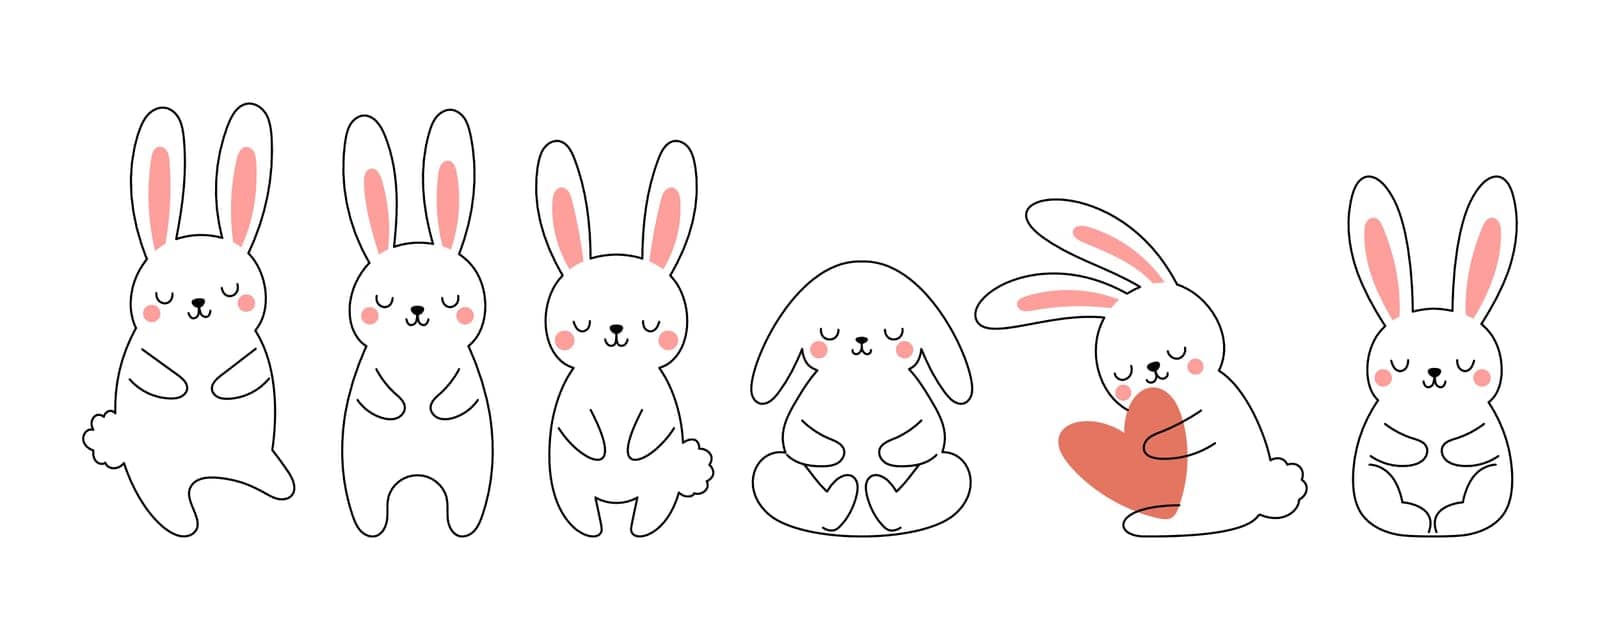 Cute little Easter bunny outline sketch collection in different poses. Cartoon rabbit character for kids cards, baby shower, invitation, poster. Vector stock illustration.